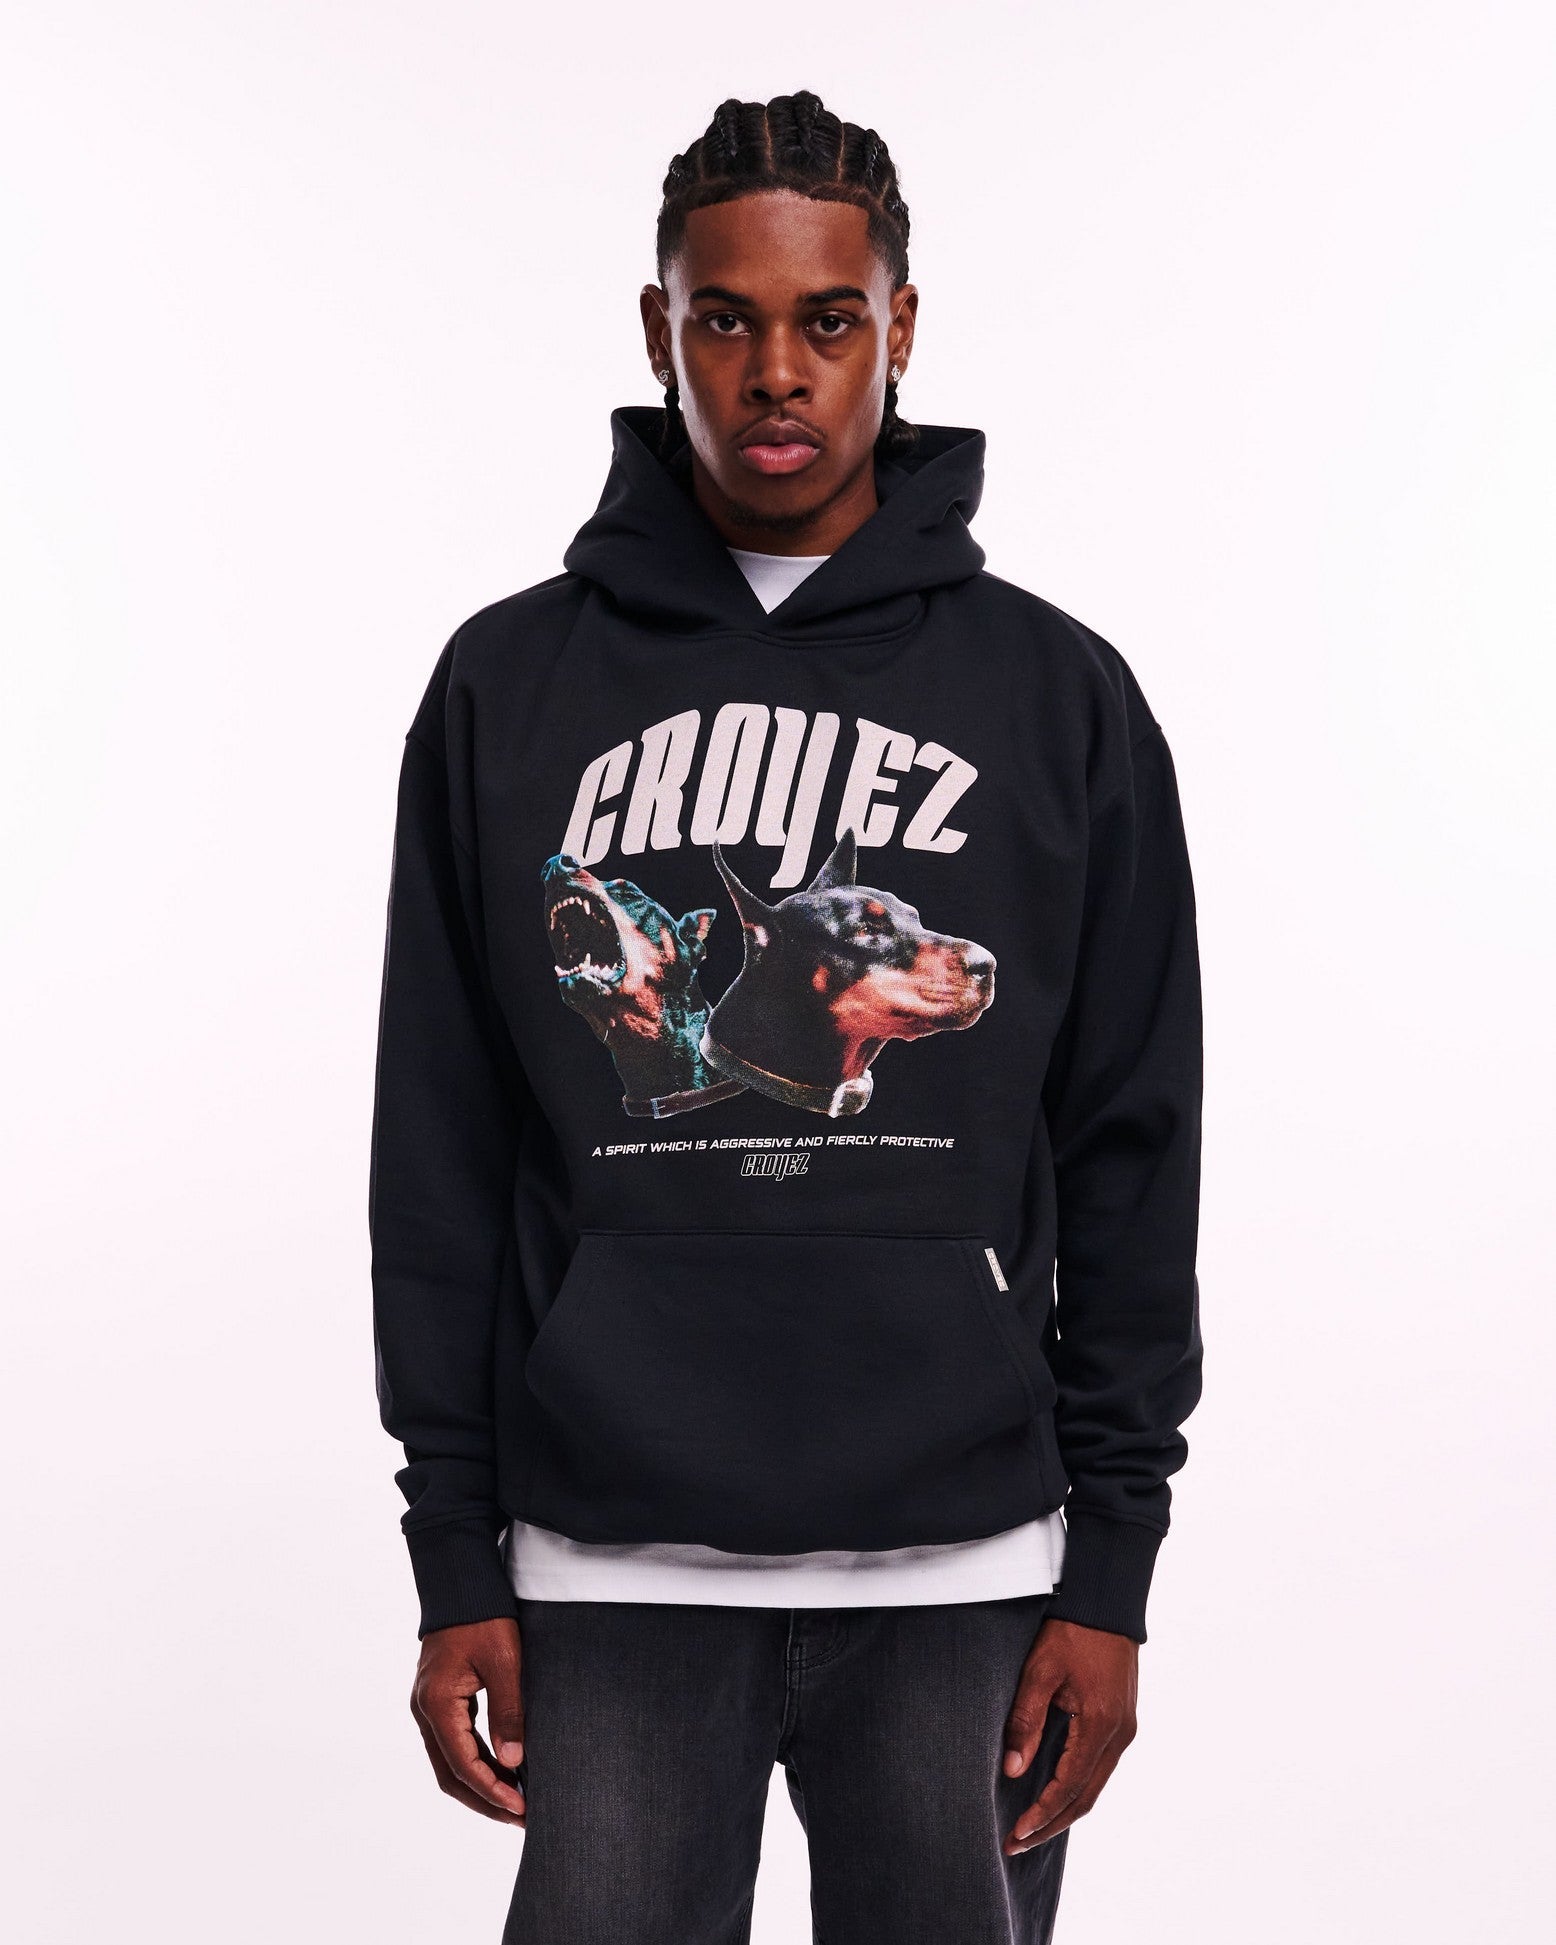 Croyez Fiercly Protective Hoodie